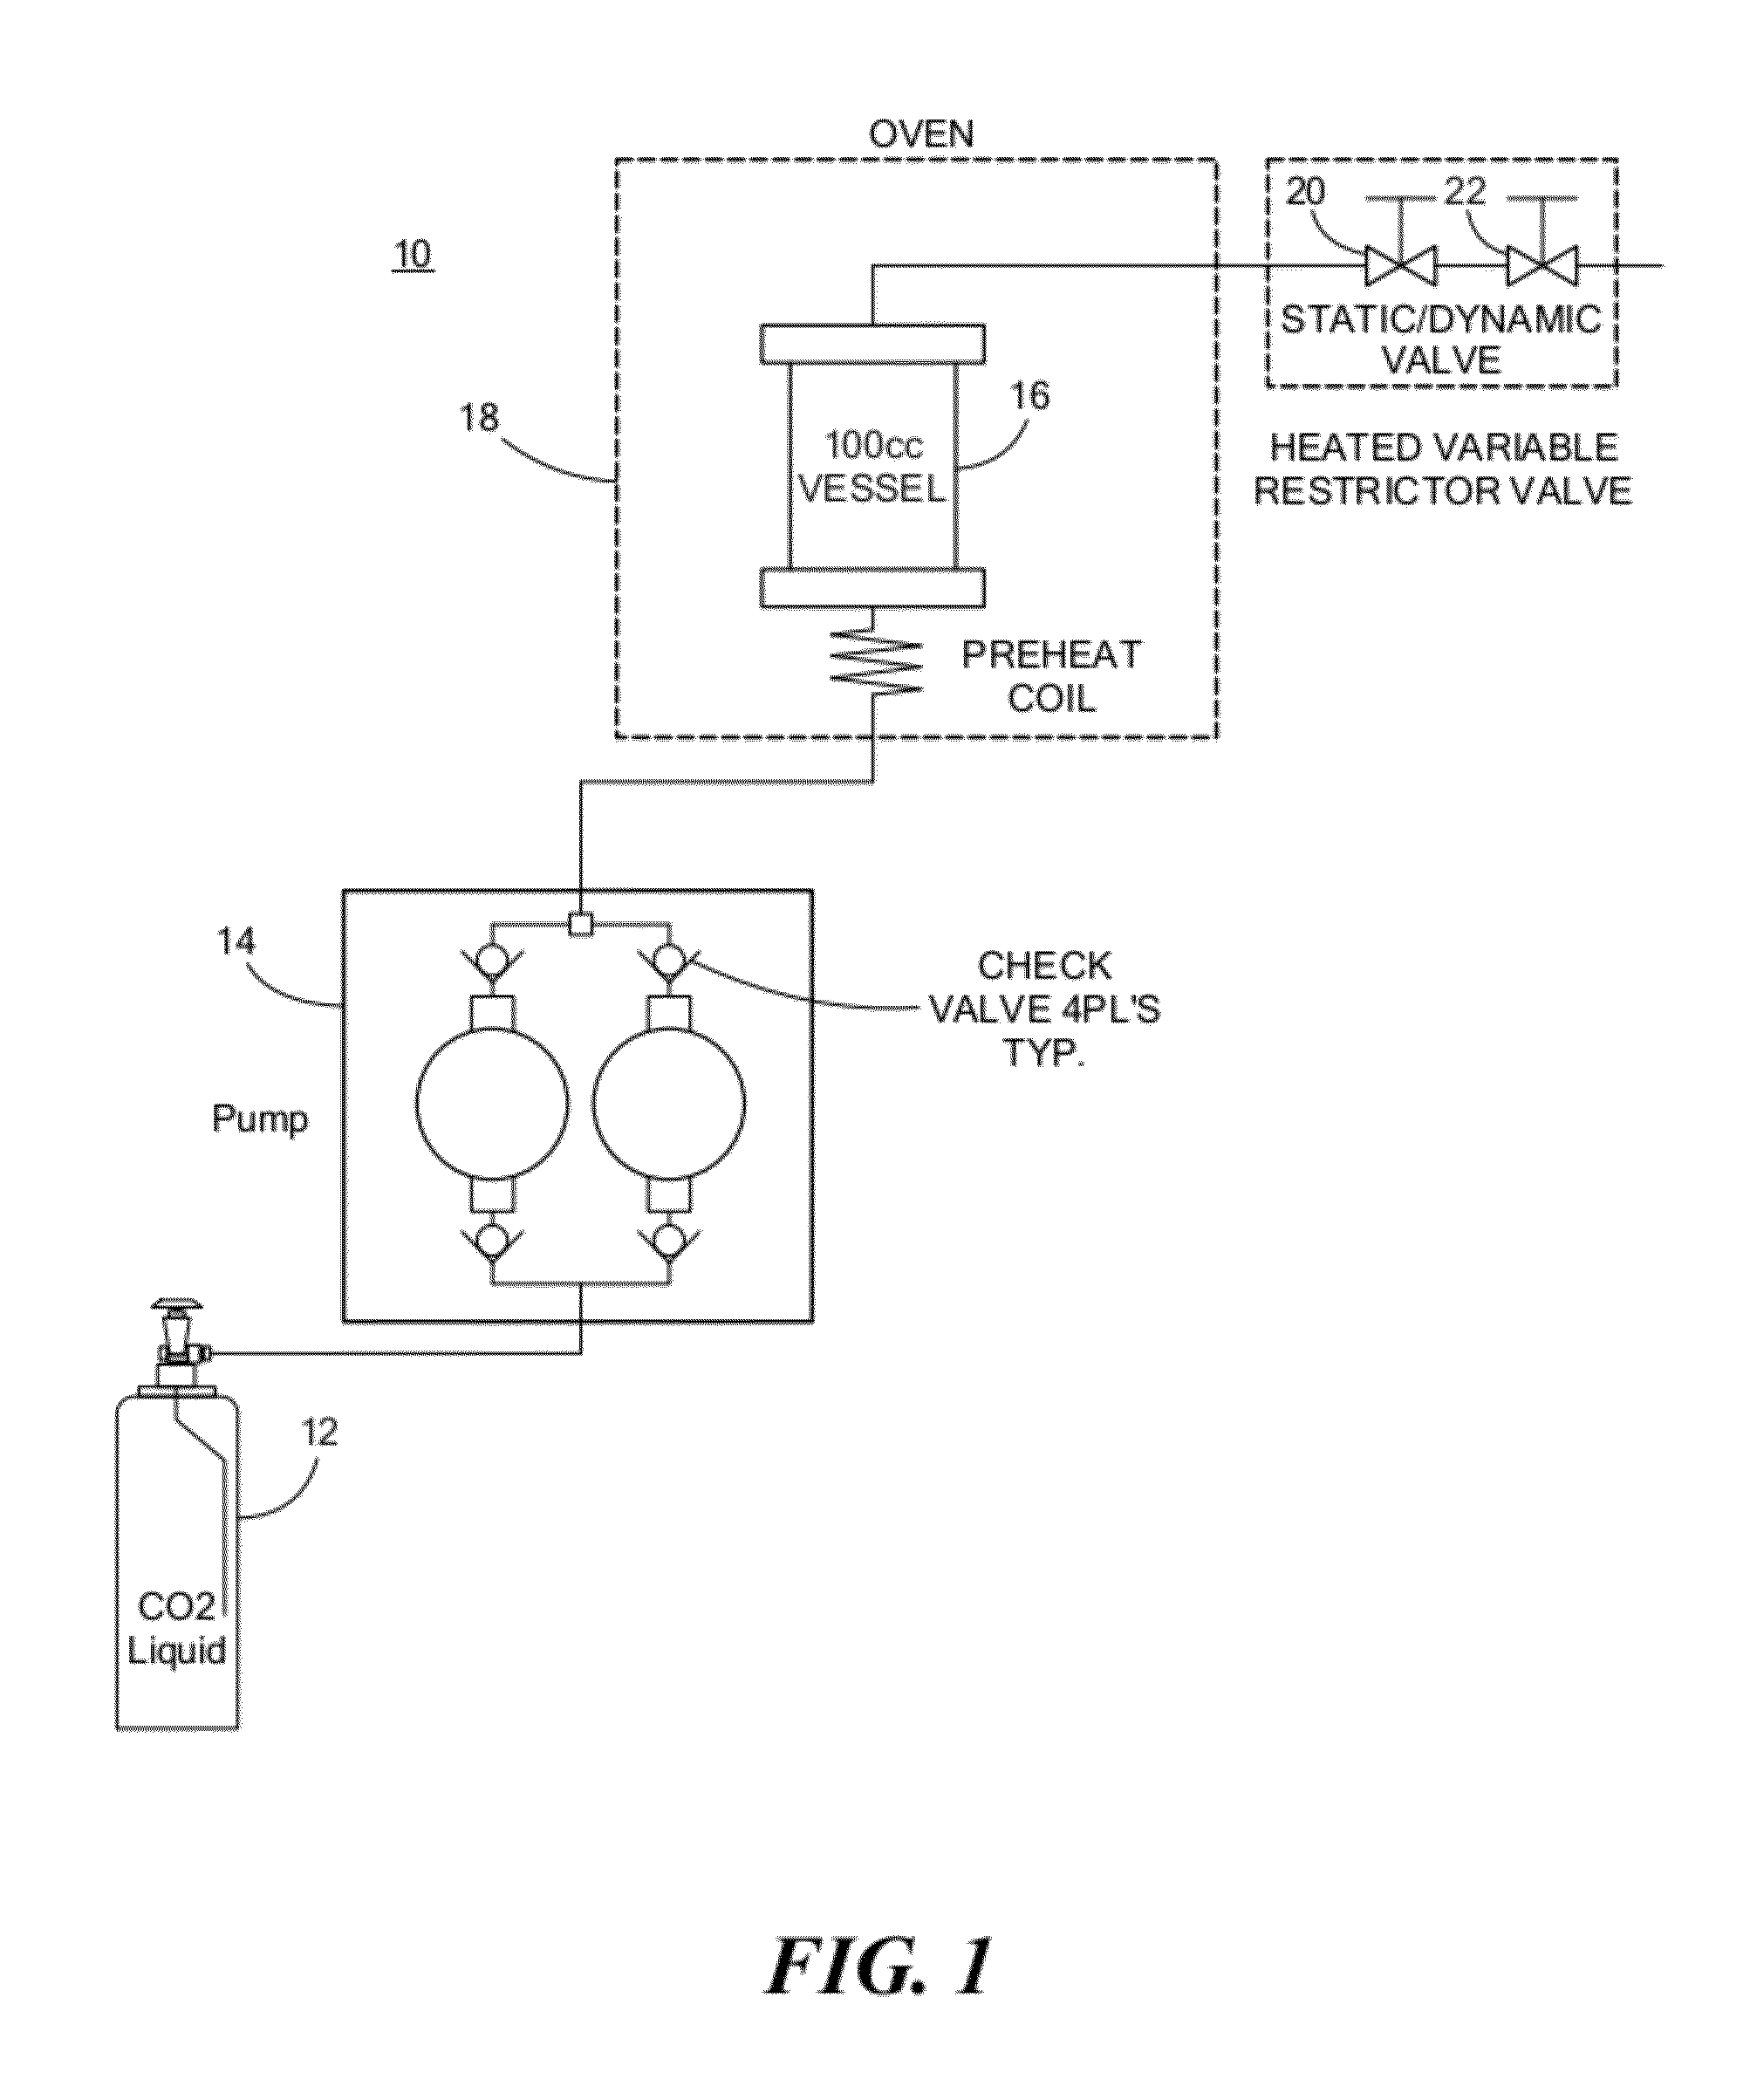 Method of treating solid and semi-solid foods to reduce microorganisms and enzymes in the food